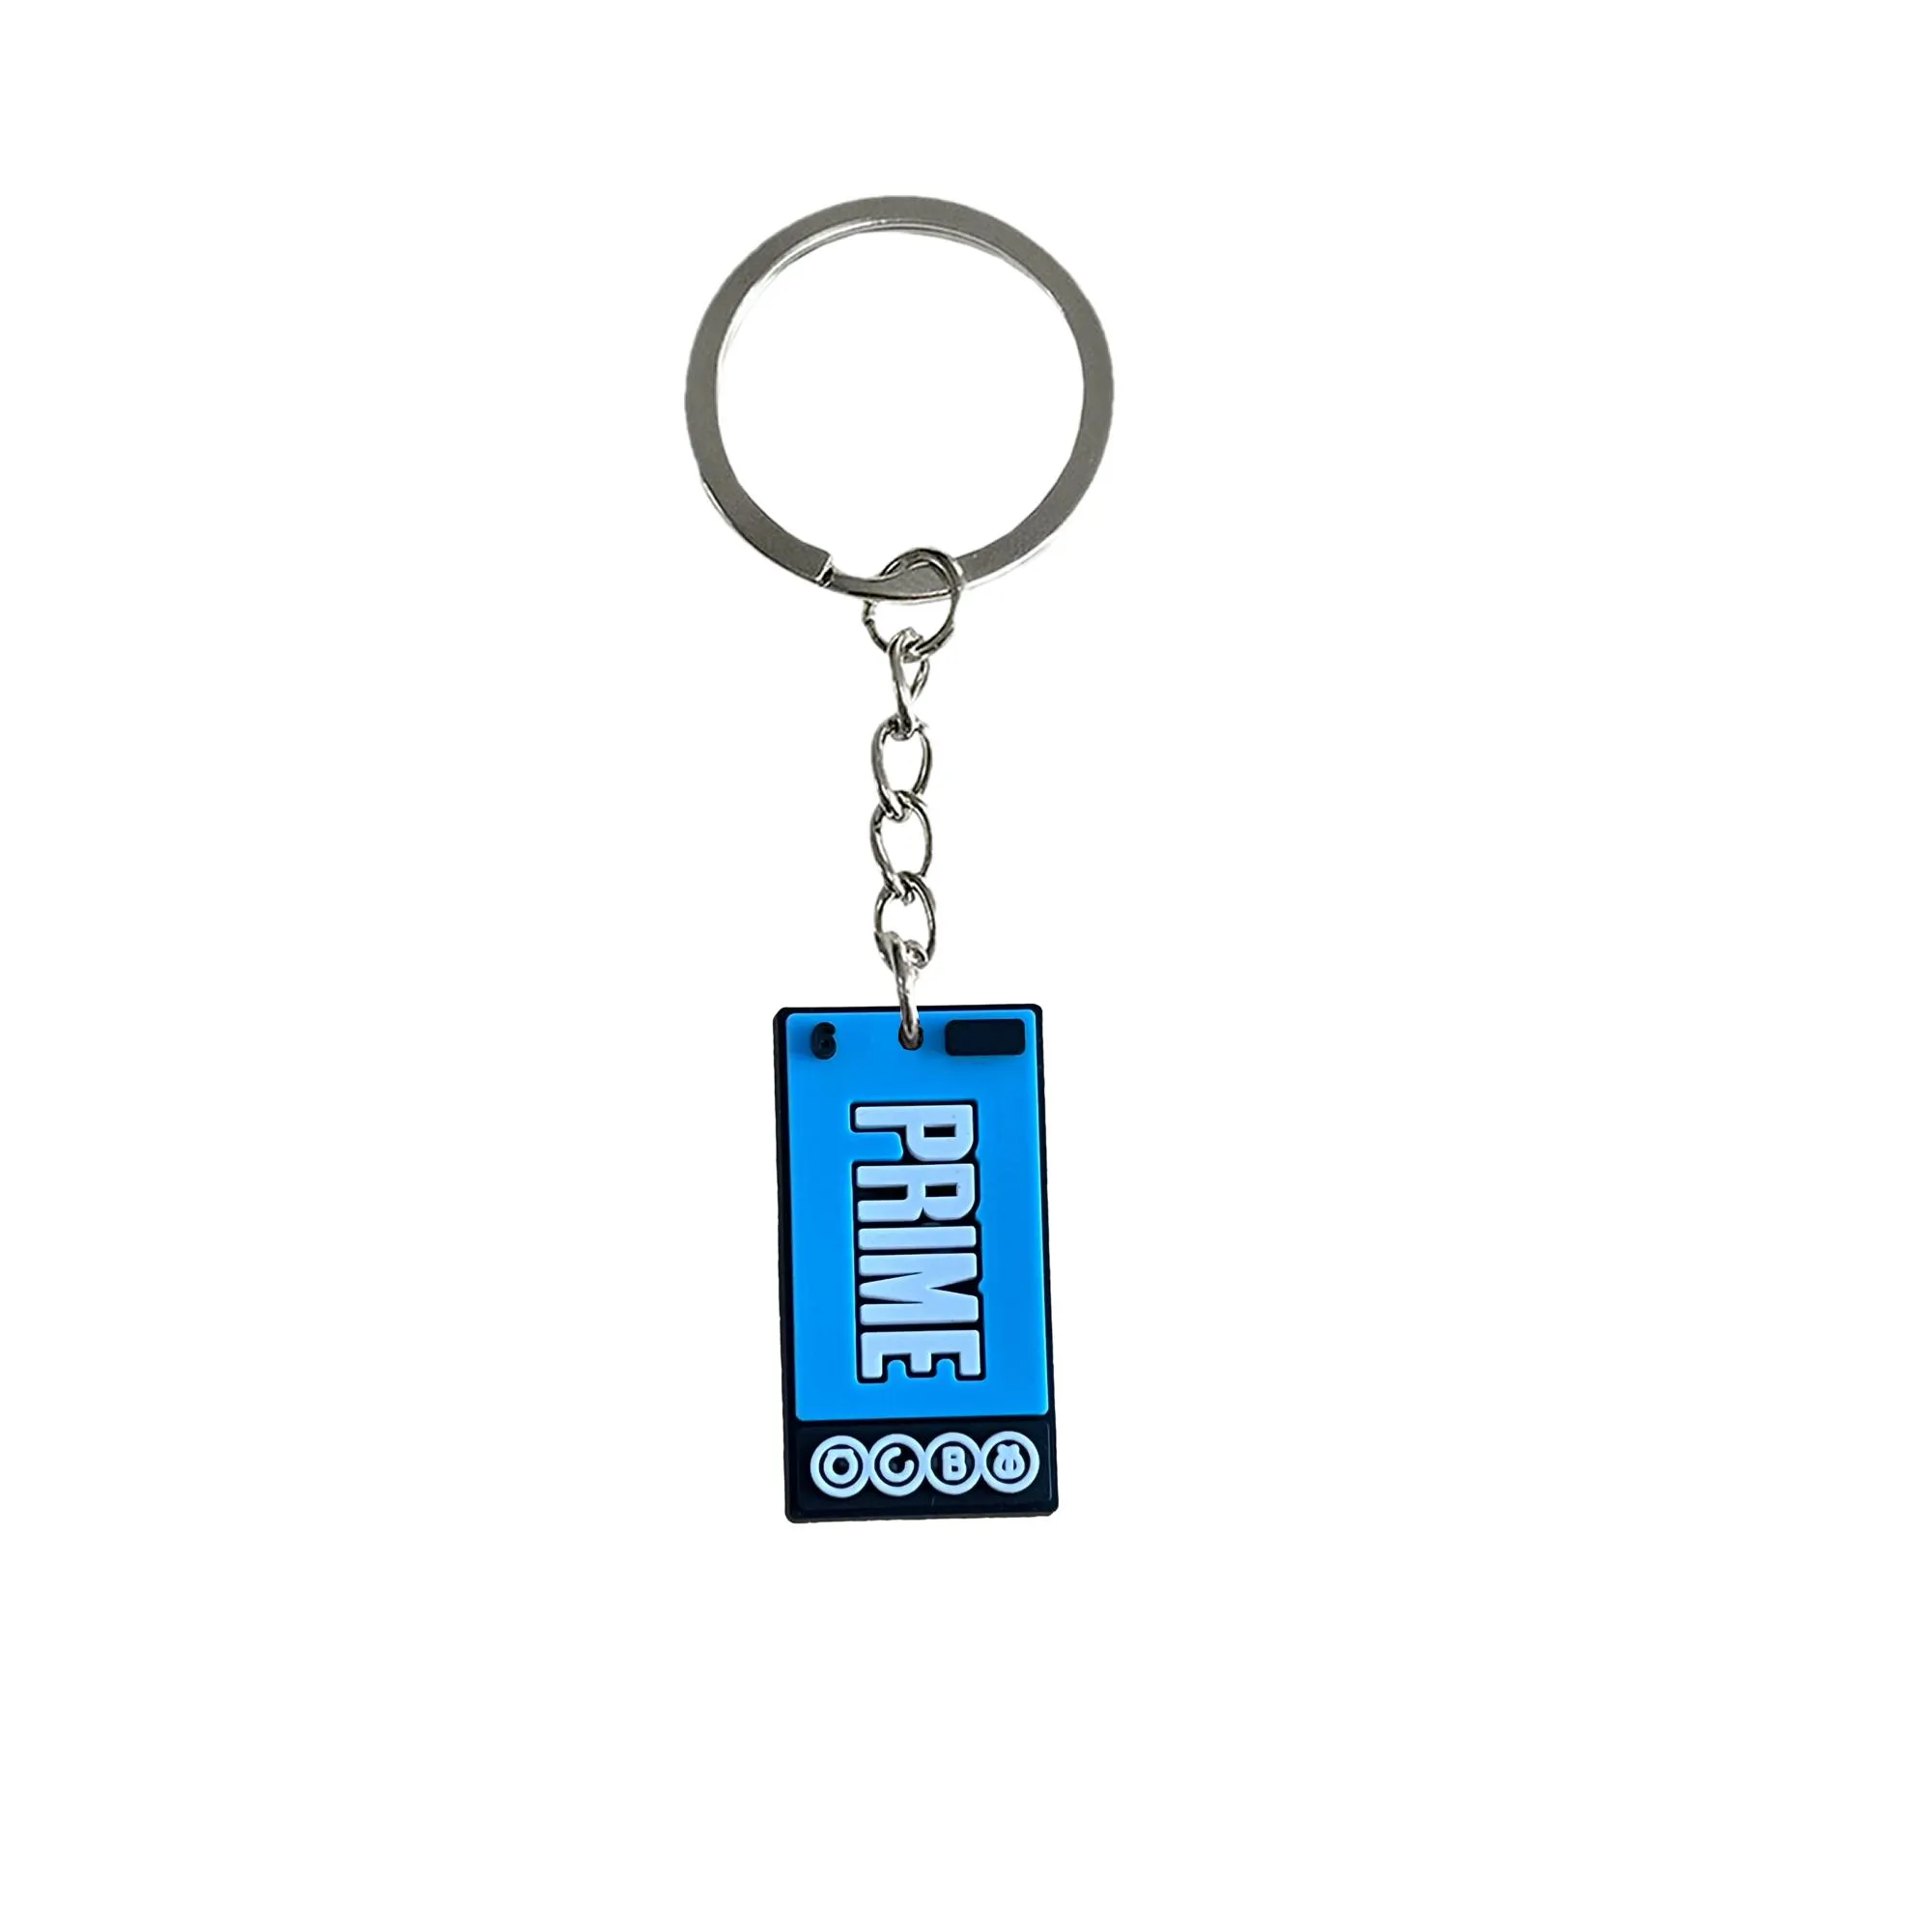 square prime keychain key chain ring christmas gift for fans boys keychains pendants accessories kids birthday party favors keyring suitable schoolbag backpack shoulder bag pendant charm classroom prizes tags goodie stuffer gifts